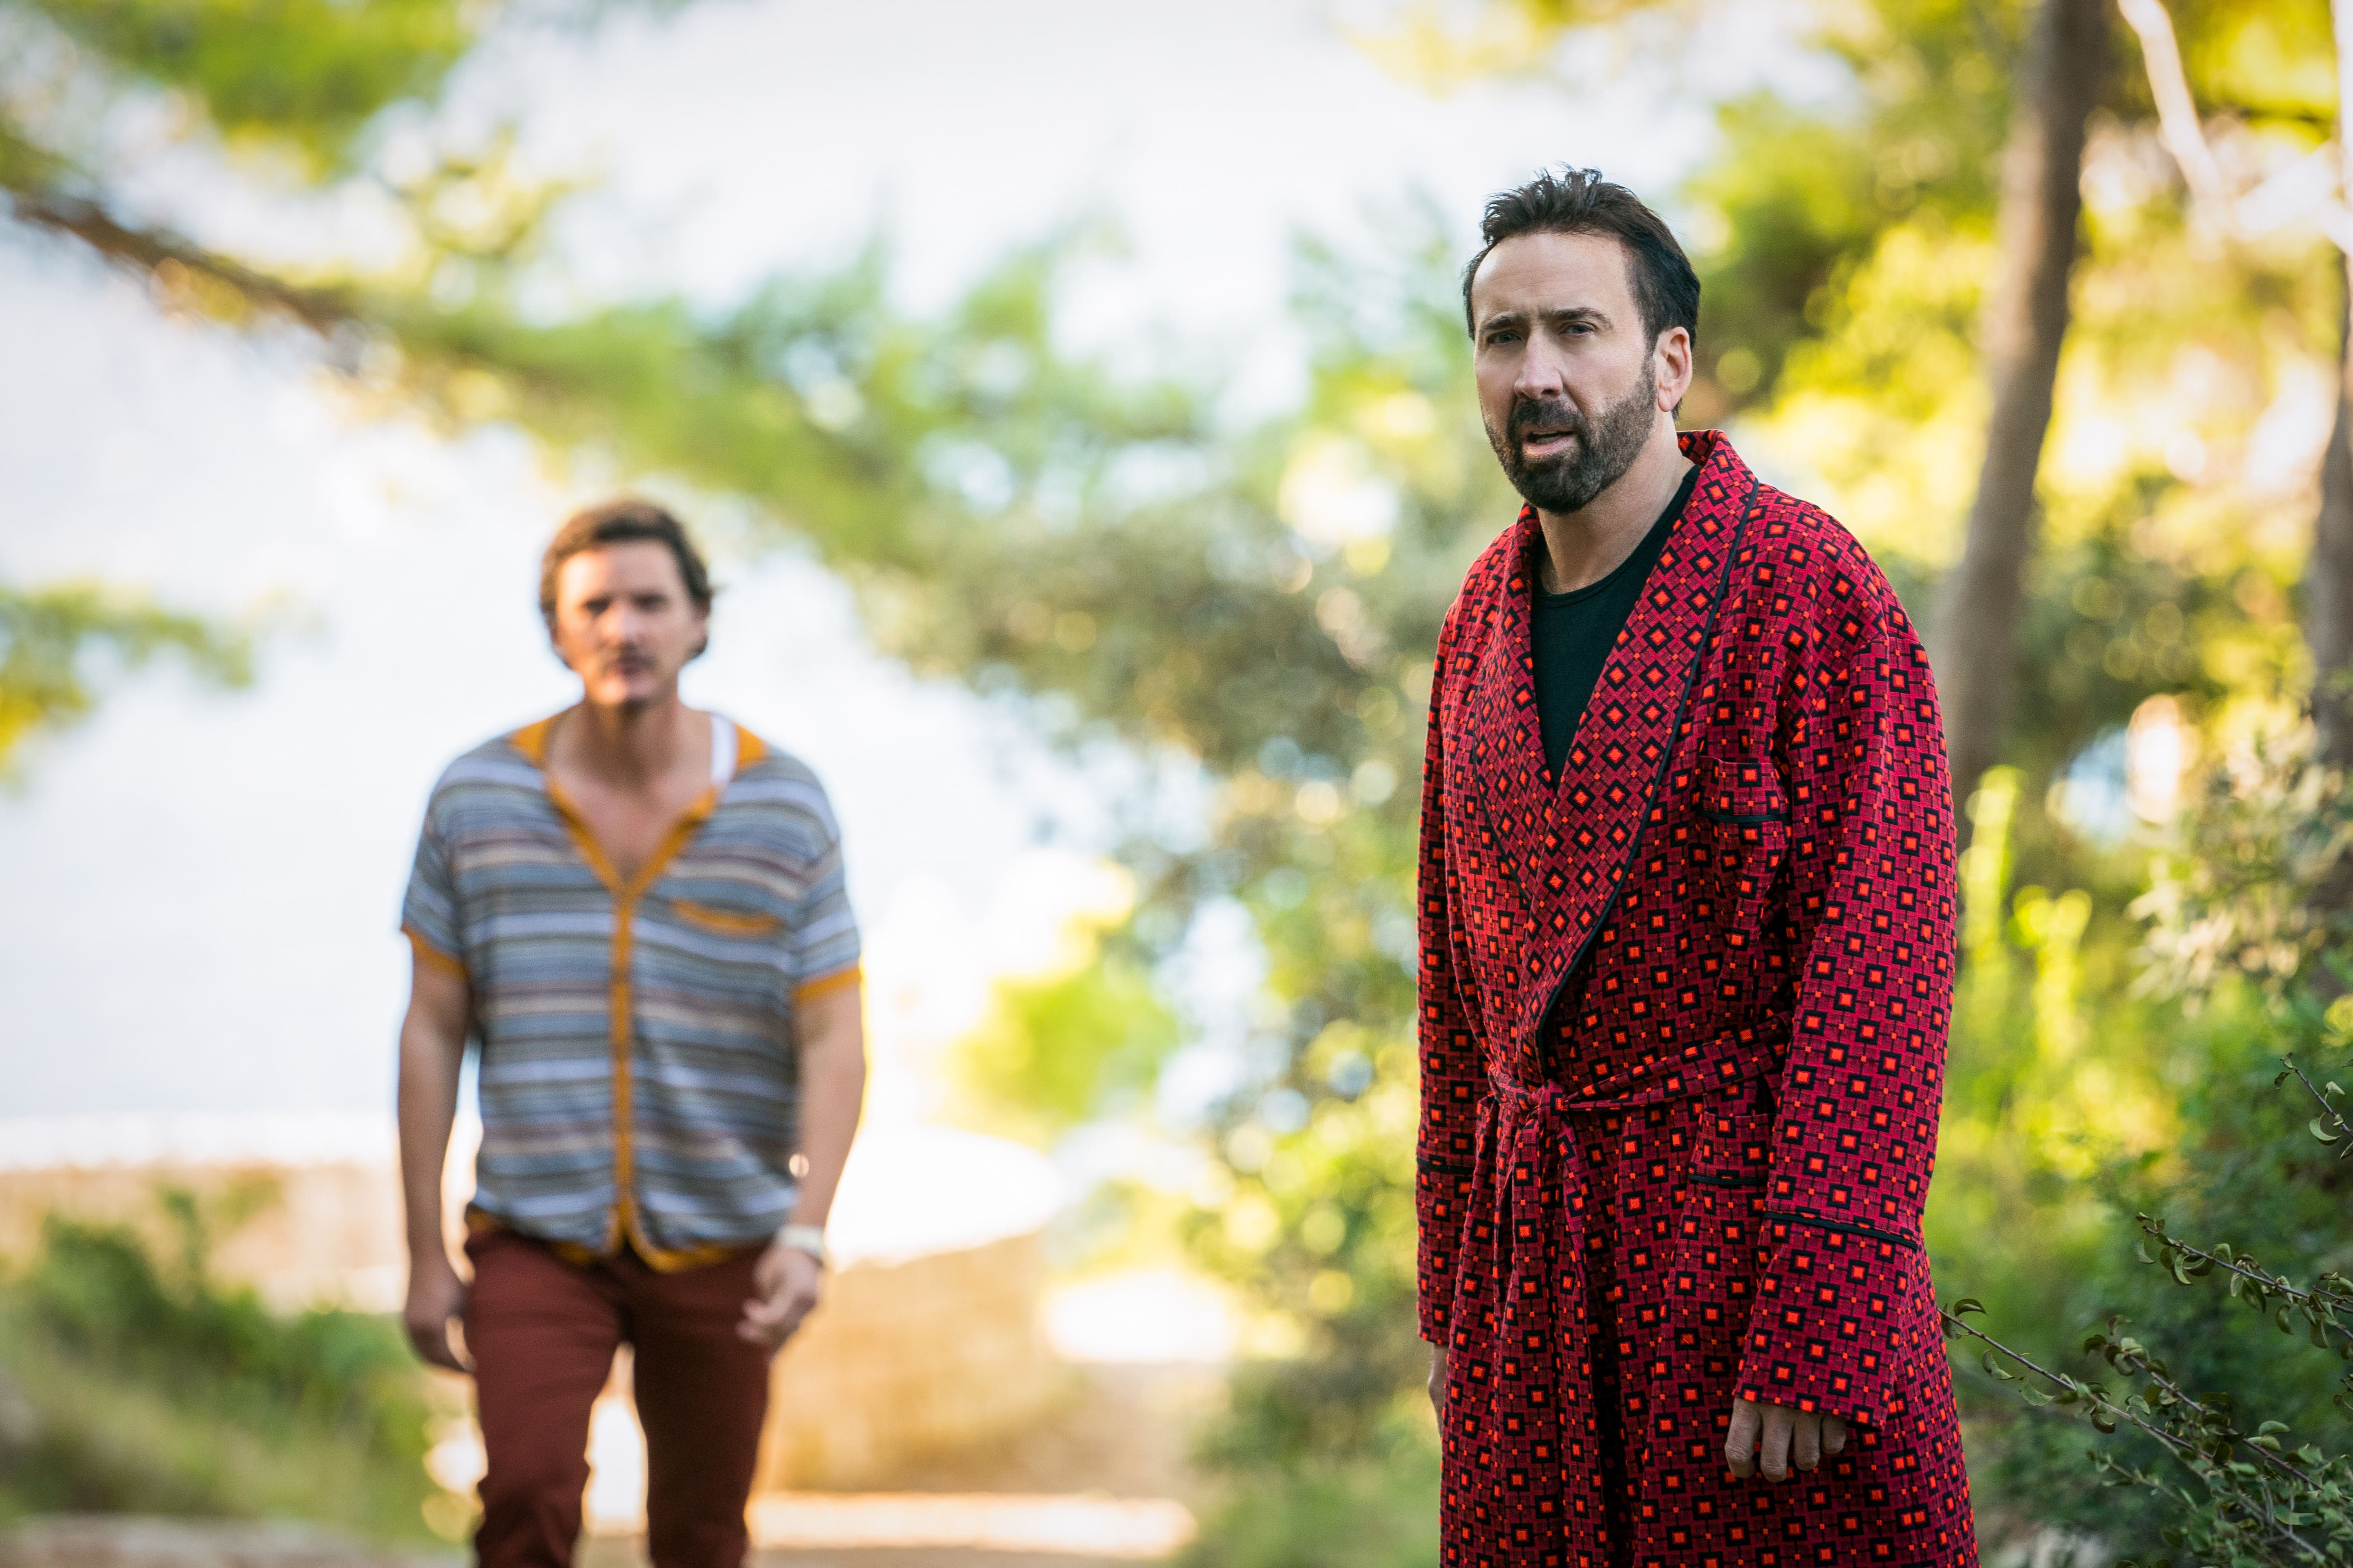 Nicolas Cage stars alongside Pedro Pascal in The Unbearable Weight of Massive Talent